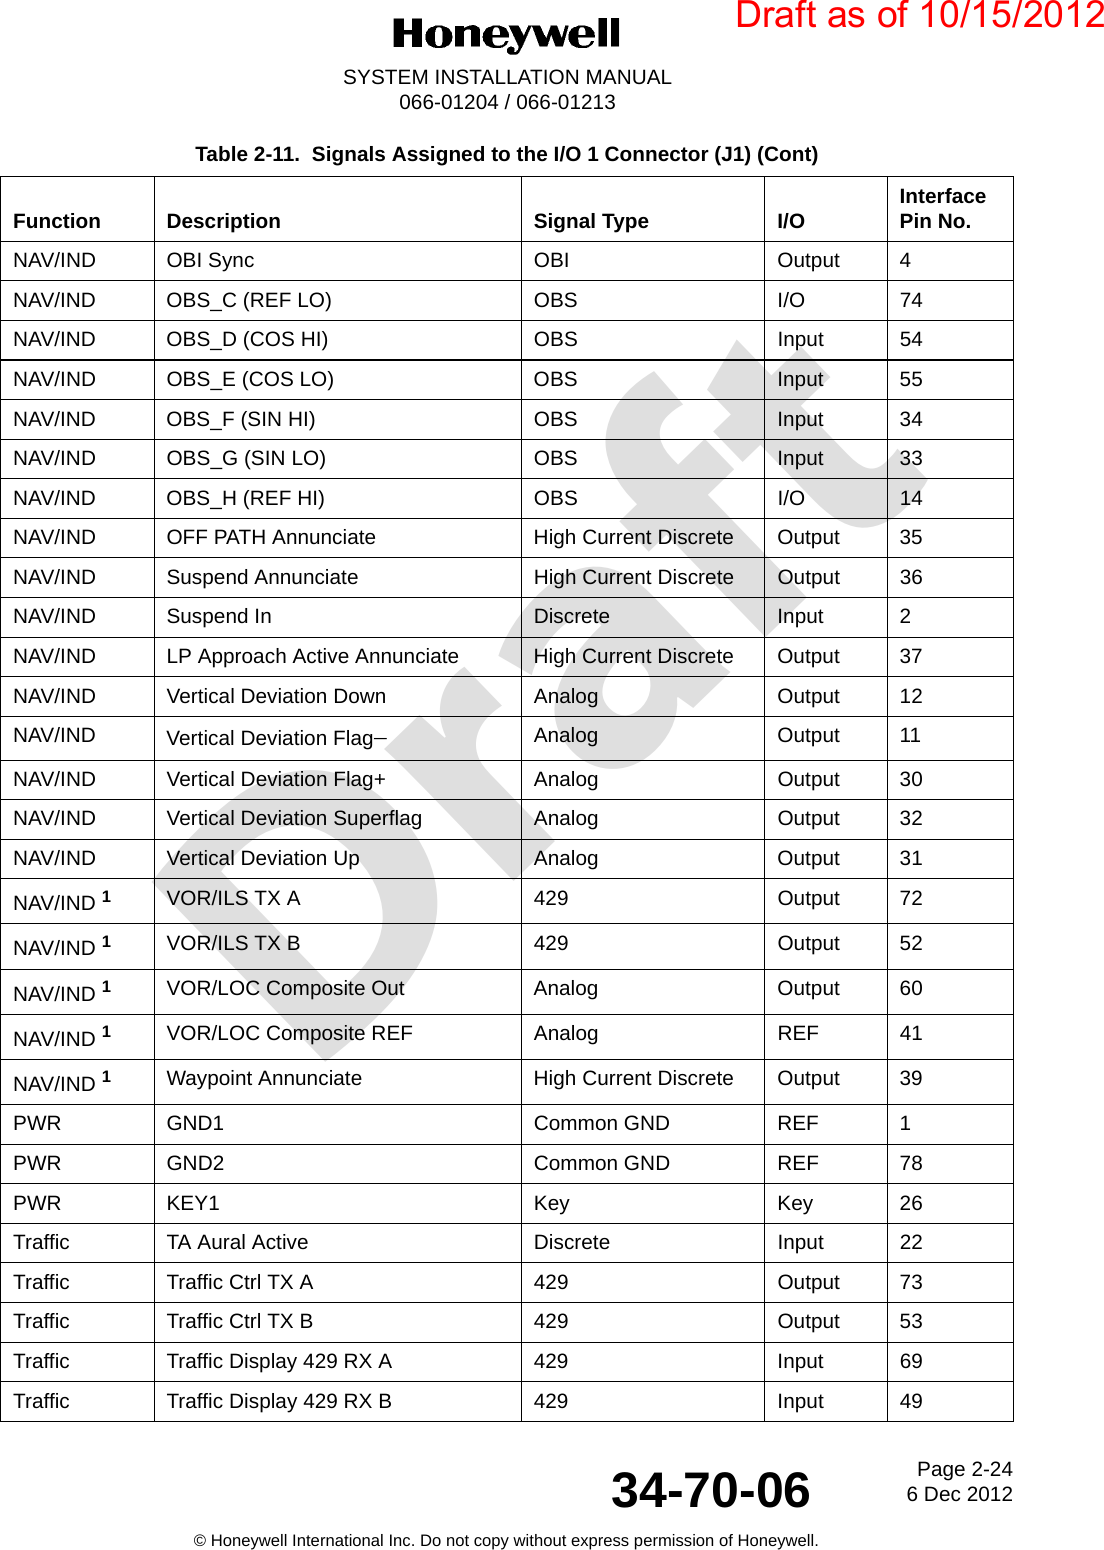 DraftPage 2-246 Dec 201234-70-06SYSTEM INSTALLATION MANUAL066-01204 / 066-01213© Honeywell International Inc. Do not copy without express permission of Honeywell.NAV/IND OBI Sync OBI Output 4NAV/IND OBS_C (REF LO) OBS I/O 74NAV/IND OBS_D (COS HI) OBS Input 54NAV/IND OBS_E (COS LO) OBS Input 55NAV/IND OBS_F (SIN HI) OBS Input 34NAV/IND OBS_G (SIN LO) OBS Input 33NAV/IND OBS_H (REF HI) OBS I/O 14NAV/IND OFF PATH Annunciate High Current Discrete Output 35NAV/IND Suspend Annunciate High Current Discrete Output 36NAV/IND Suspend In Discrete Input 2NAV/IND LP Approach Active Annunciate High Current Discrete Output 37NAV/IND Vertical Deviation Down Analog Output 12NAV/IND Vertical Deviation FlagAnalog Output 11NAV/IND Vertical Deviation Flag+ Analog Output 30NAV/IND Vertical Deviation Superflag Analog Output 32NAV/IND Vertical Deviation Up Analog Output 31NAV/IND 1VOR/ILS TX A 429 Output 72NAV/IND 1VOR/ILS TX B 429 Output 52NAV/IND 1VOR/LOC Composite Out Analog Output 60NAV/IND 1VOR/LOC Composite REF Analog REF 41NAV/IND 1Waypoint Annunciate High Current Discrete Output 39PWR GND1 Common GND REF 1PWR GND2 Common GND REF 78PWR KEY1 Key Key 26Traffic TA Aural Active Discrete Input 22Traffic Traffic Ctrl TX A 429 Output 73Traffic Traffic Ctrl TX B 429 Output 53Traffic Traffic Display 429 RX A 429 Input 69Traffic Traffic Display 429 RX B 429 Input 49Table 2-11.  Signals Assigned to the I/O 1 Connector (J1) (Cont)Function Description Signal Type I/O Interface Pin No.Draft as of 10/15/2012